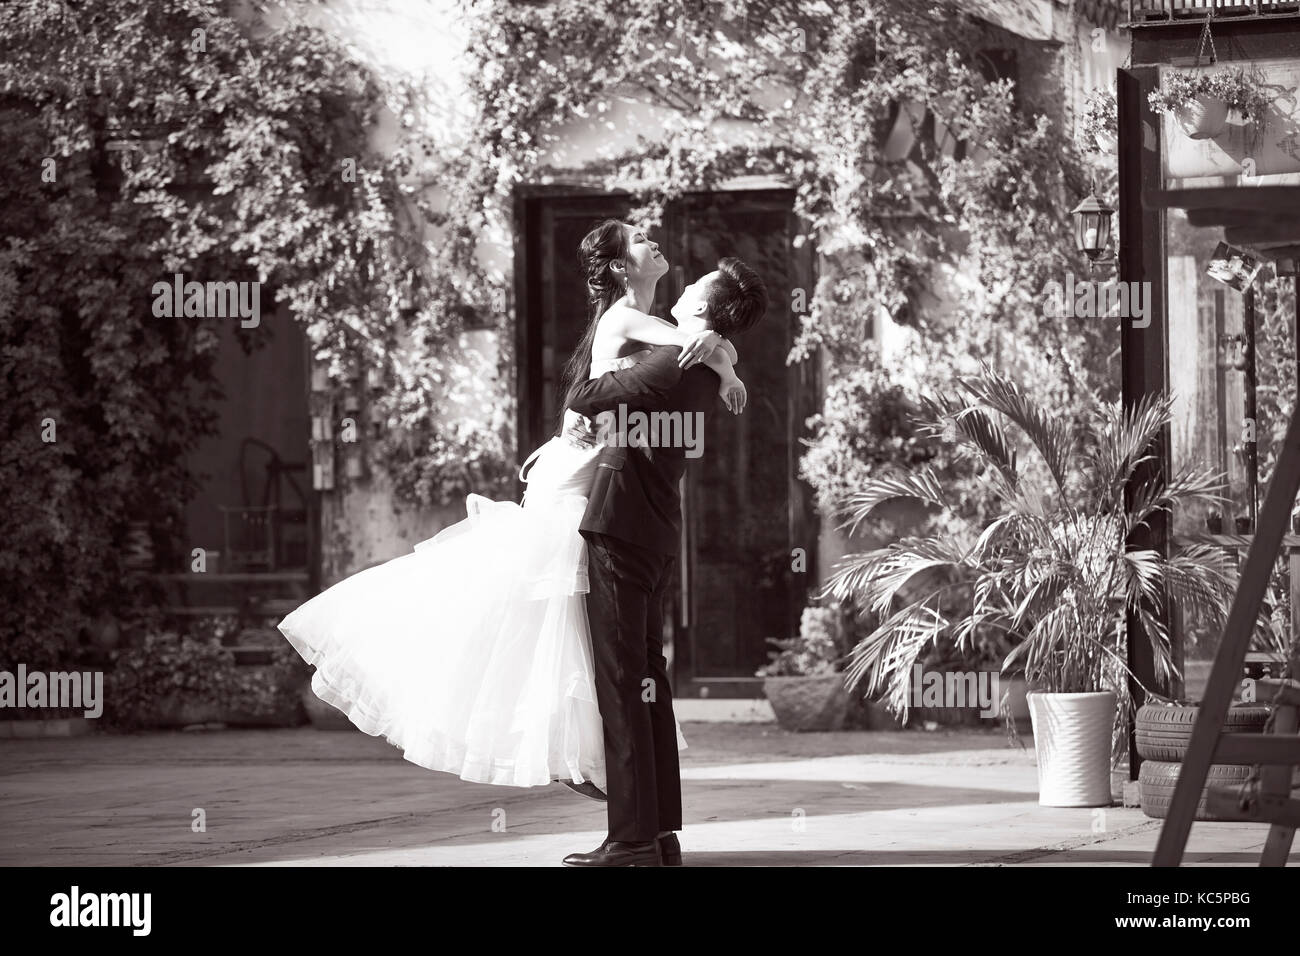 asian newly wed bride and groom celebrating marriage outside a building, black and white. Stock Photo